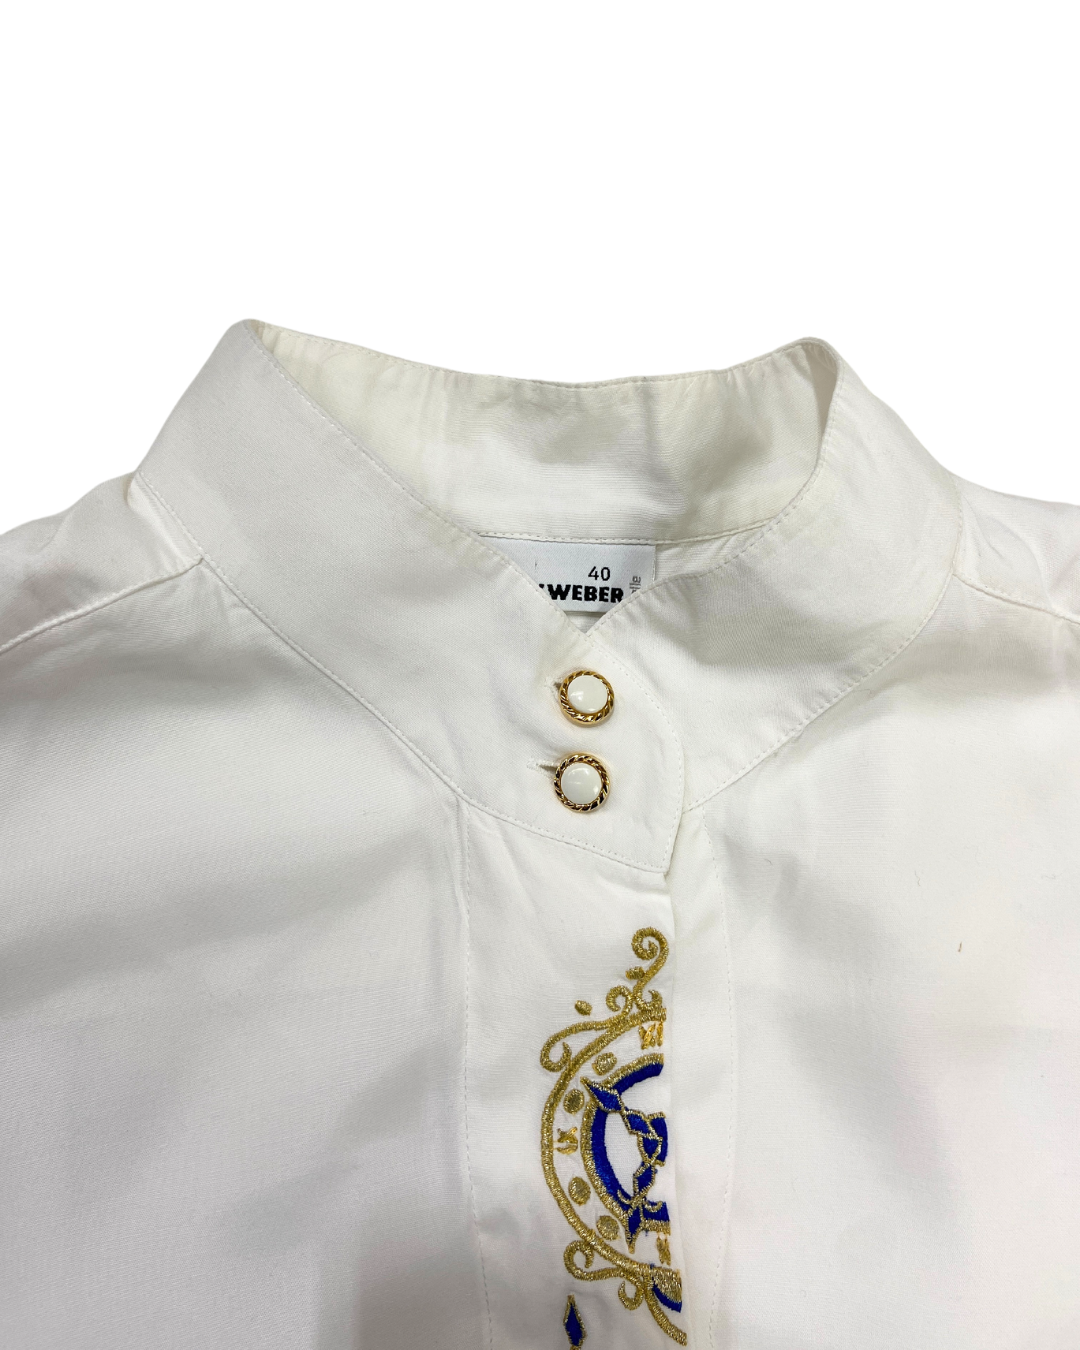 Gerry Weber White Embroidered Button Up Shirt